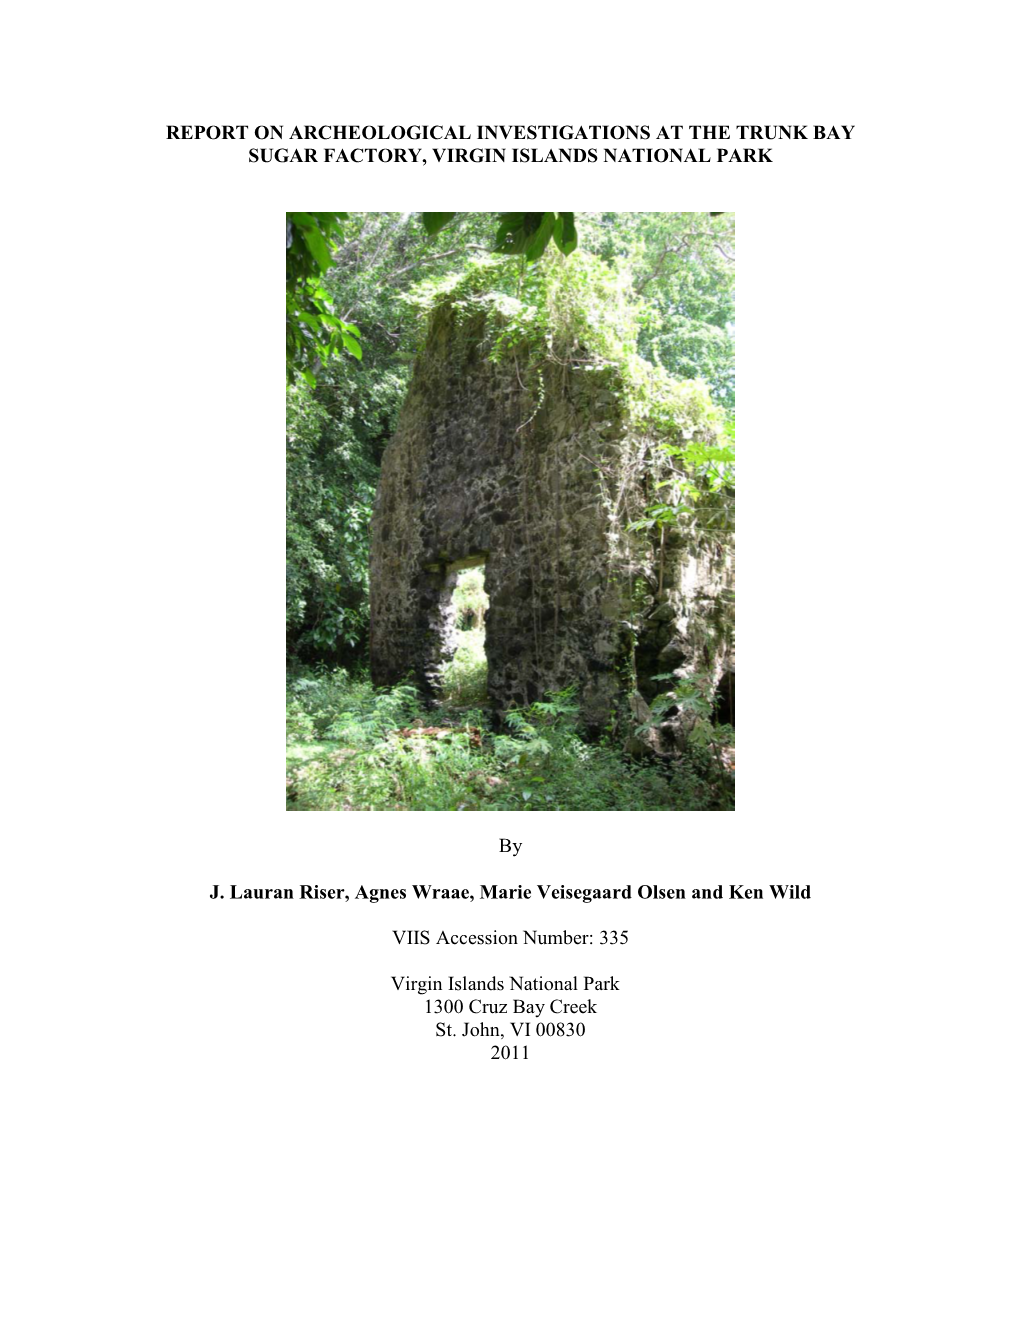 Report on Archeological Investigations at the Trunk Bay Sugar Factory, Virgin Islands National Park